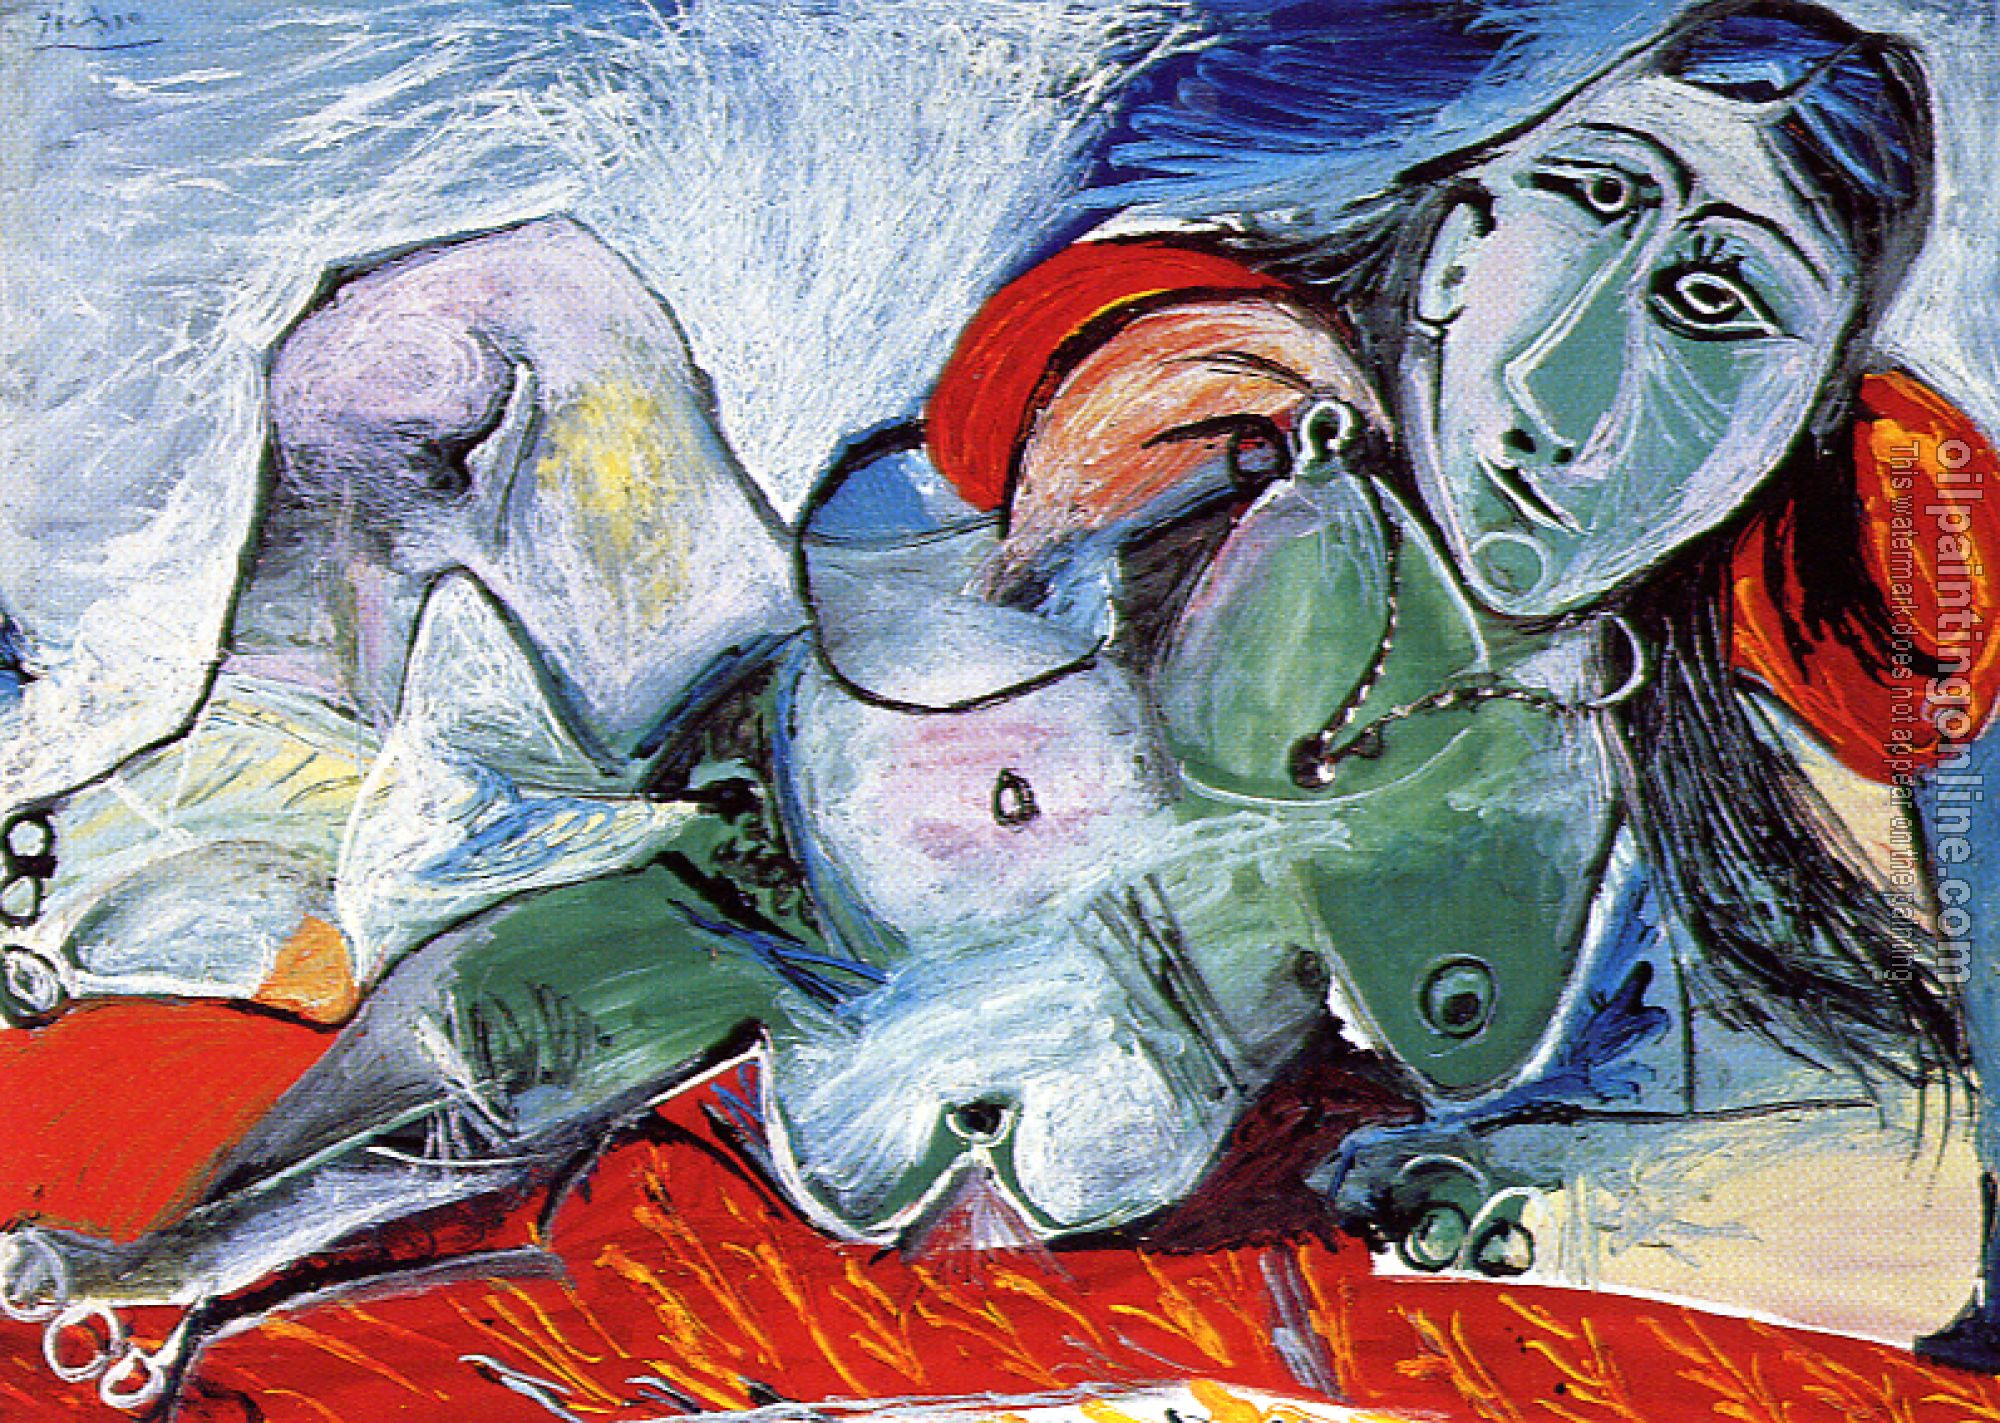 Picasso, Pablo - reclining nude with a necklace